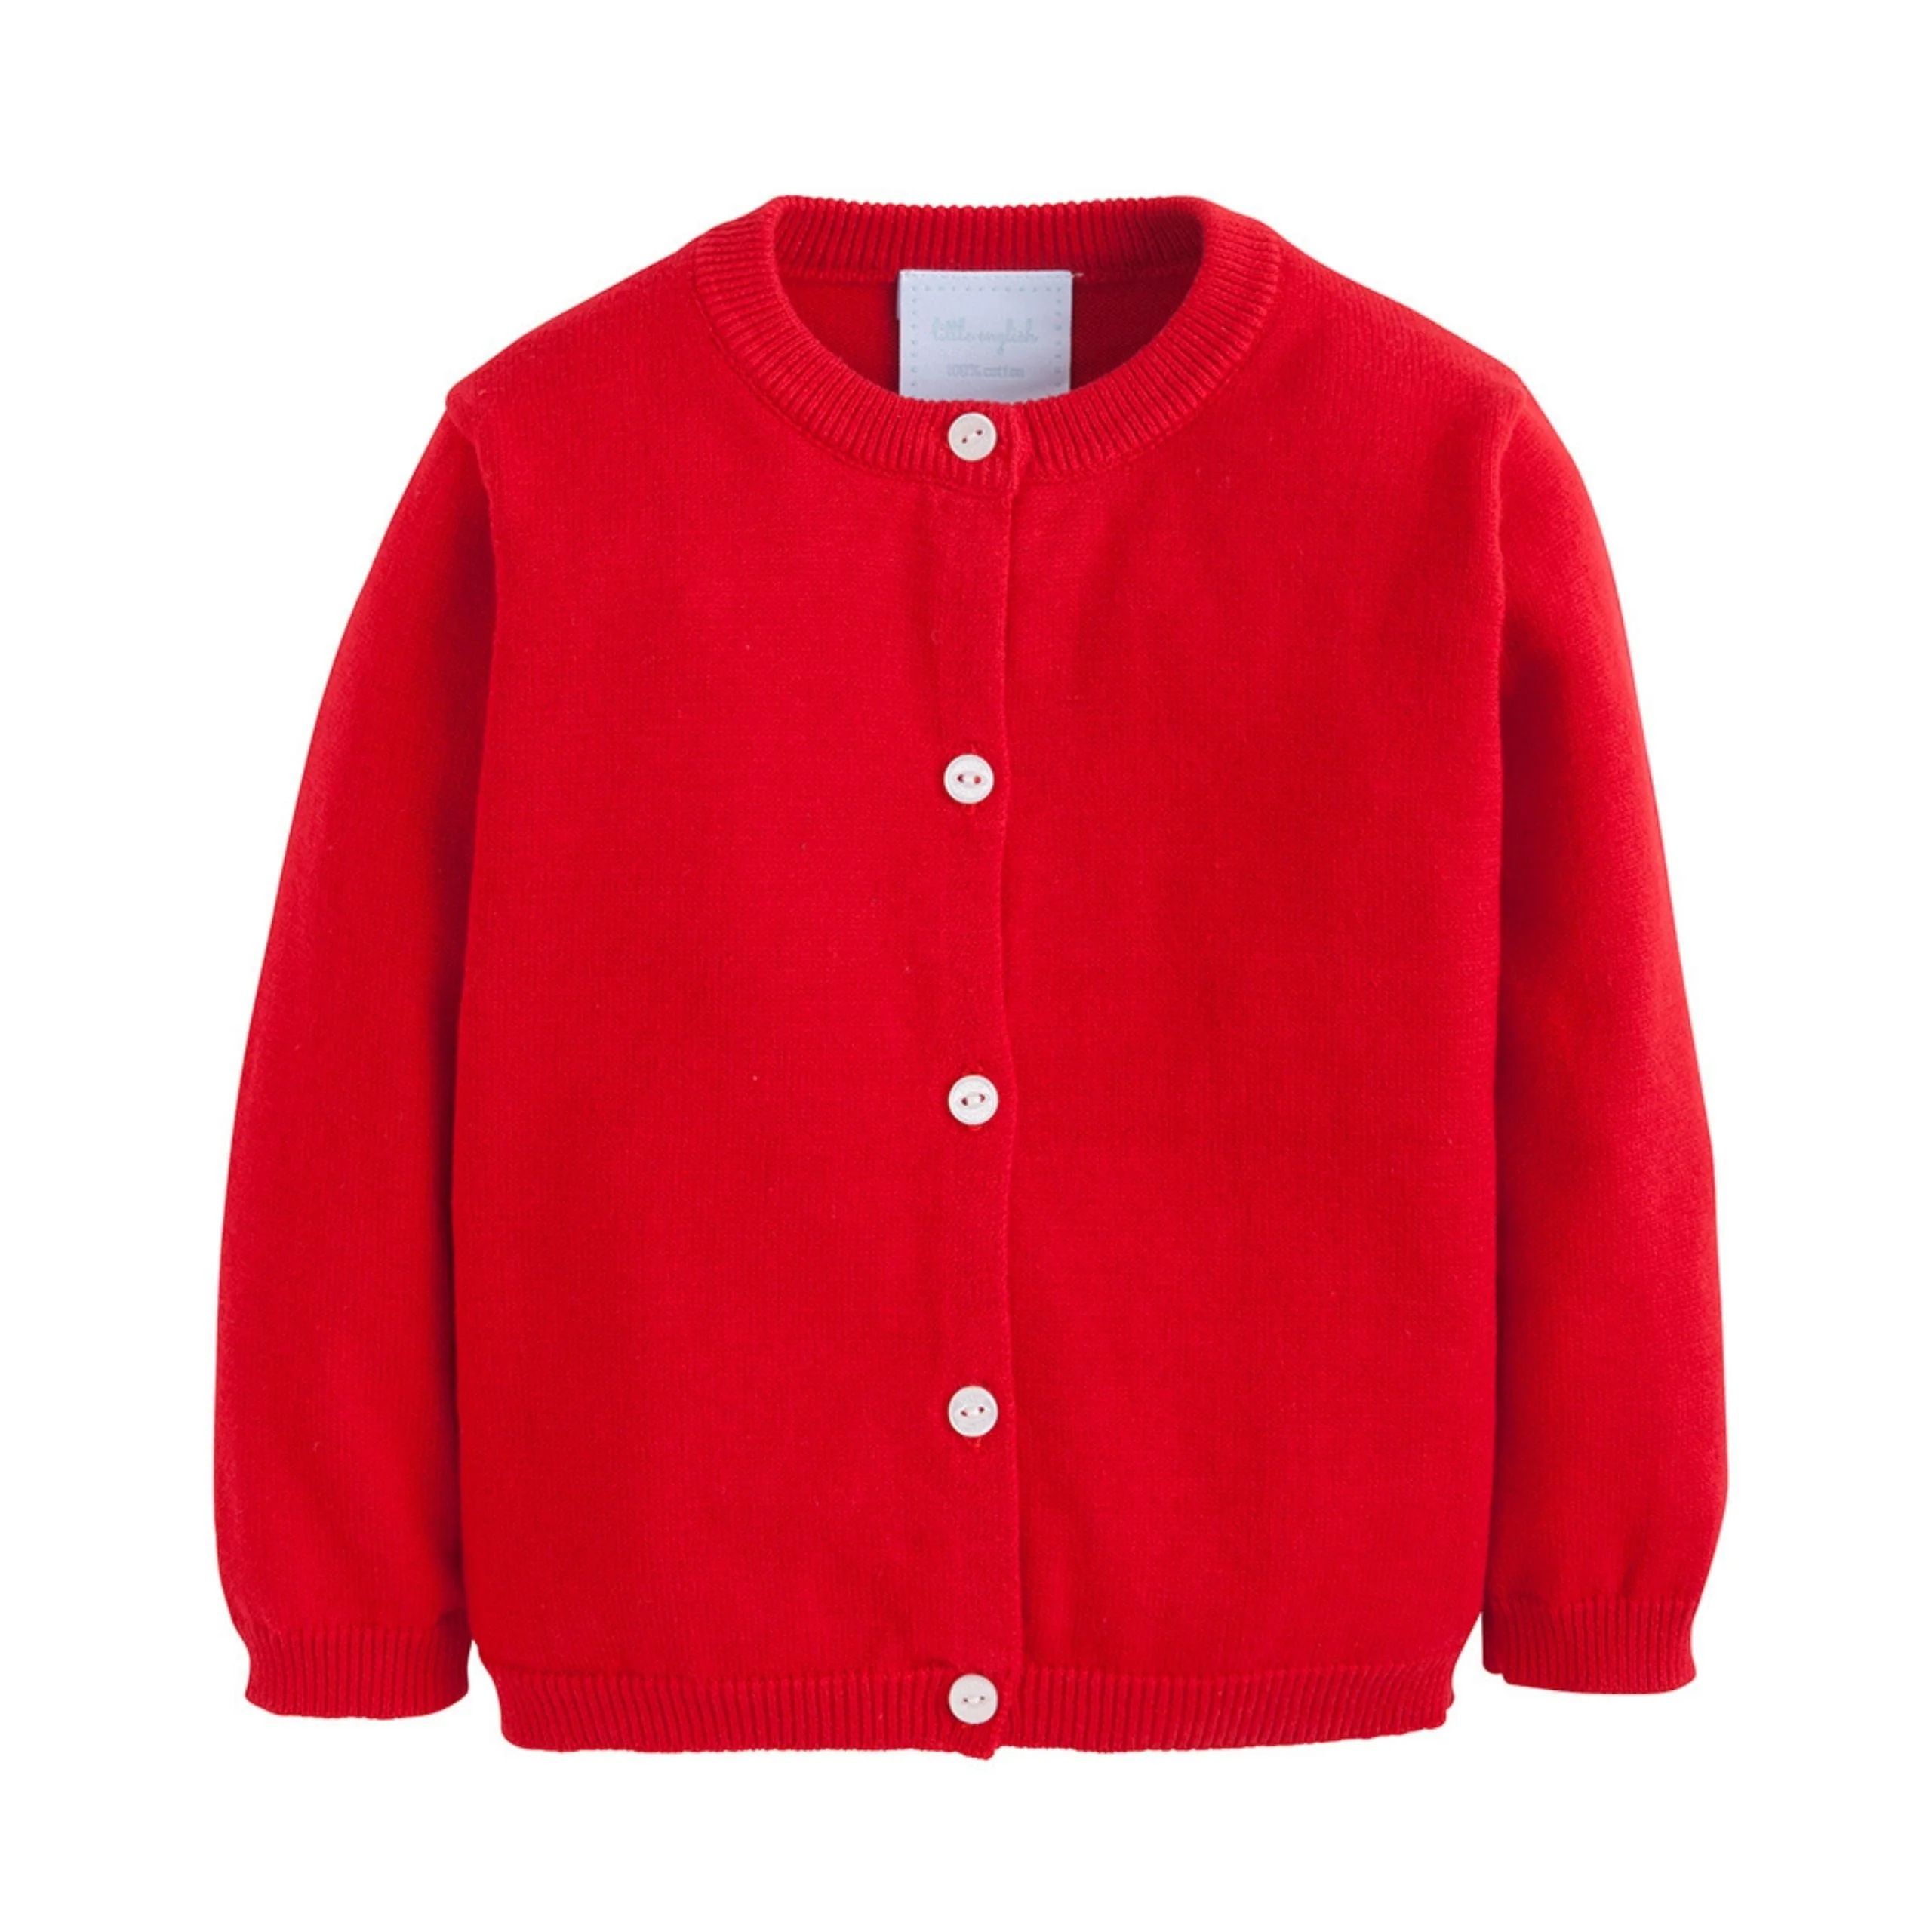 Kid's Red Cardigan - Knit Sweater | Little English